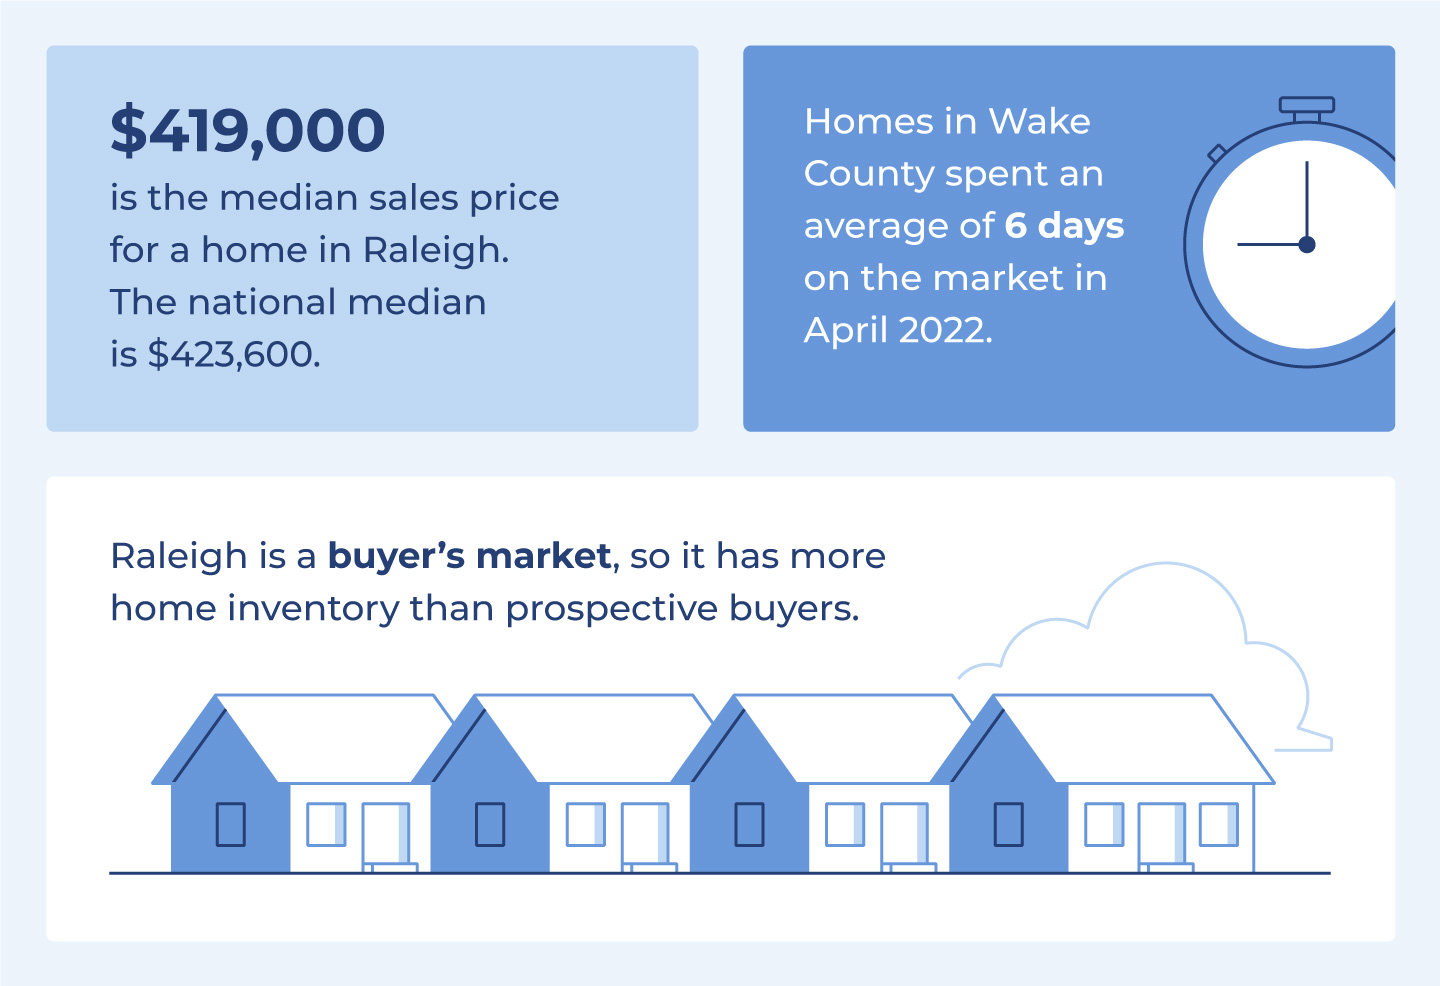 The median price for a home in Raleigh is almost $5,000 less than the national median. Raleigh has more home inventory than prospective buyers, so it’s a buyer’s market. However, homes are selling for 105.4% of the original asking price in Wake County.